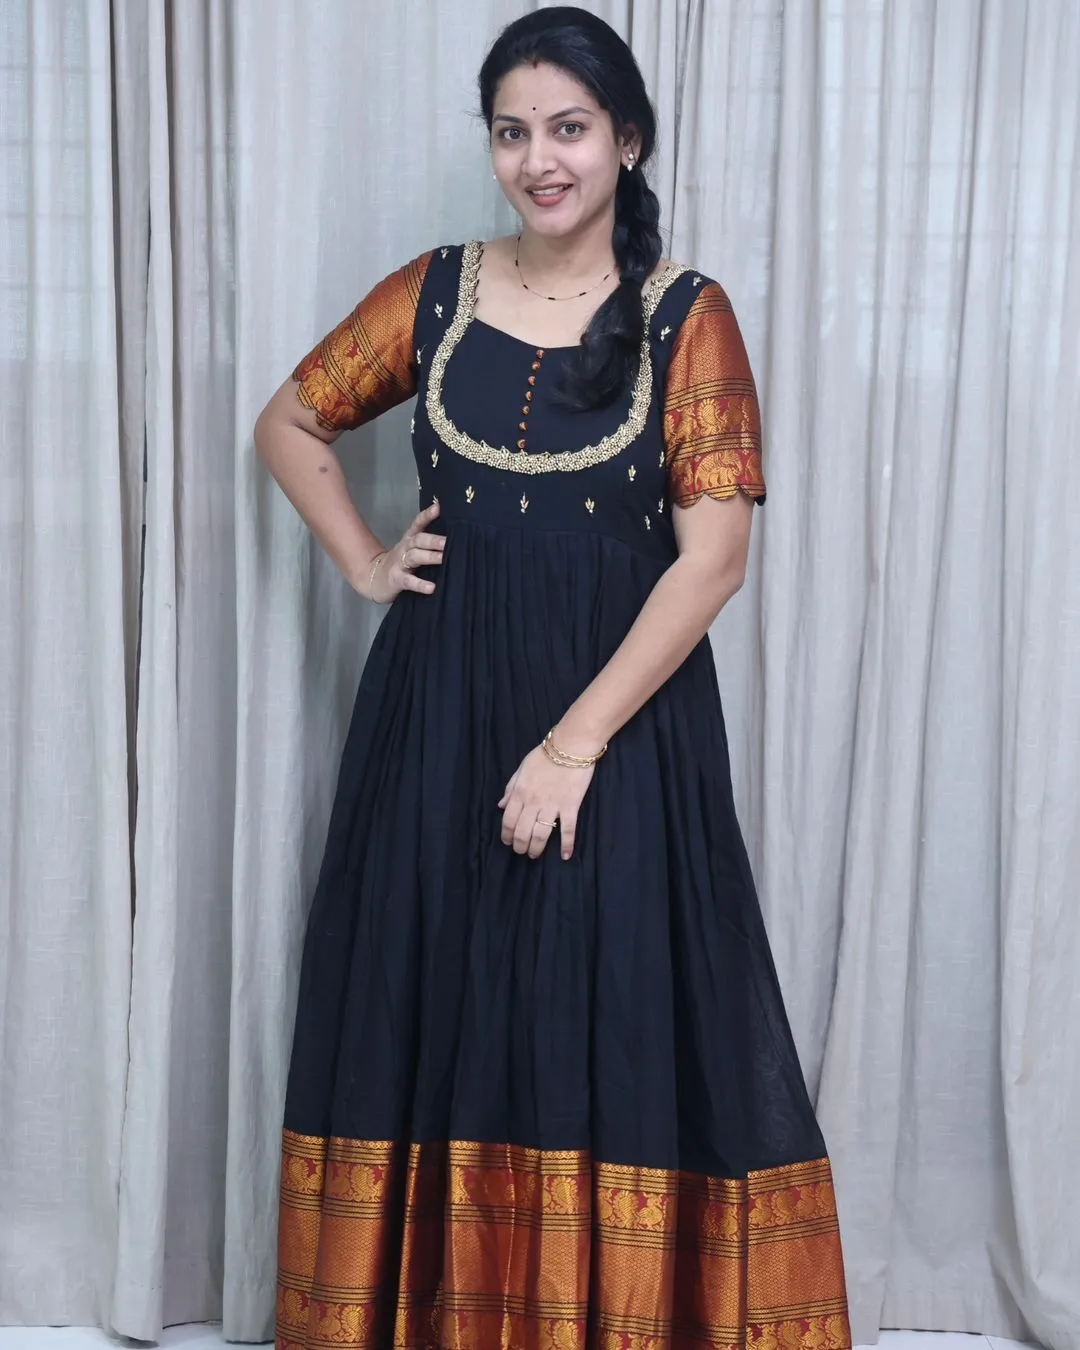 SOUTH INDIAN TV ACTRESS PALLAVI RAMISETTY IN BLACK DRESS 2